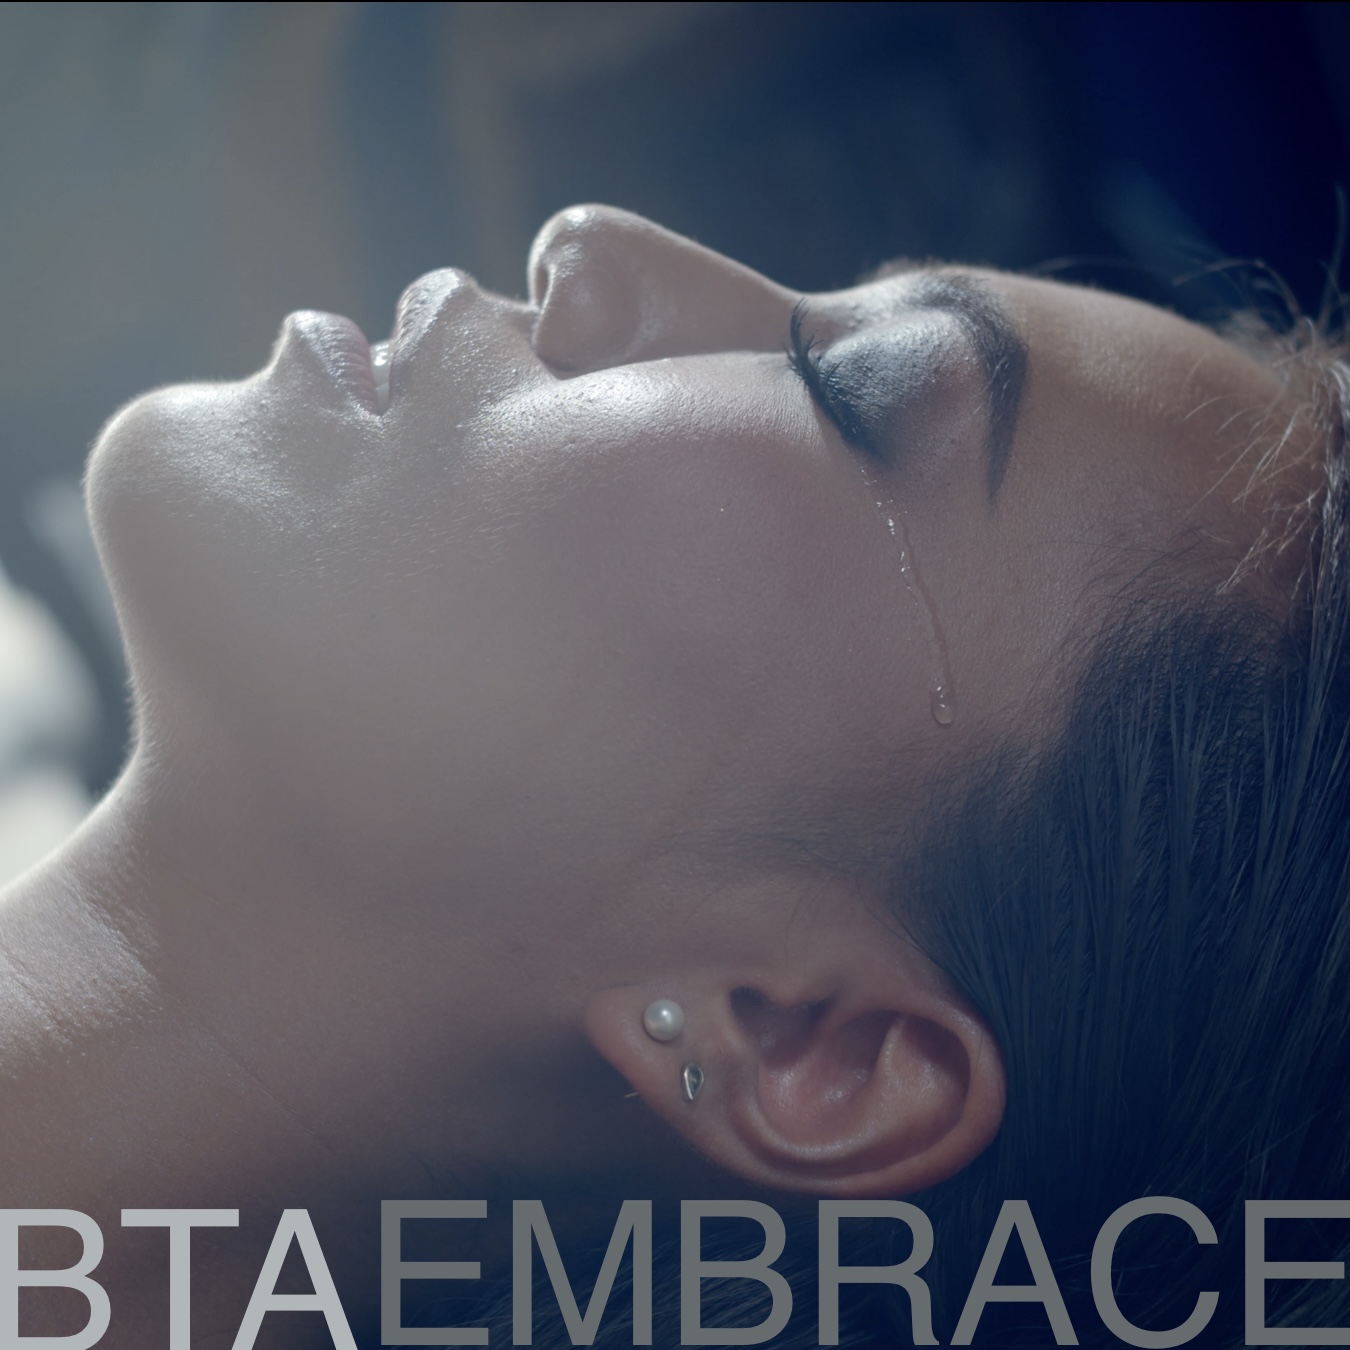 Hear BTA’s captivatingly dynamic vocal performance on touching new debut single ‘Embrace’.